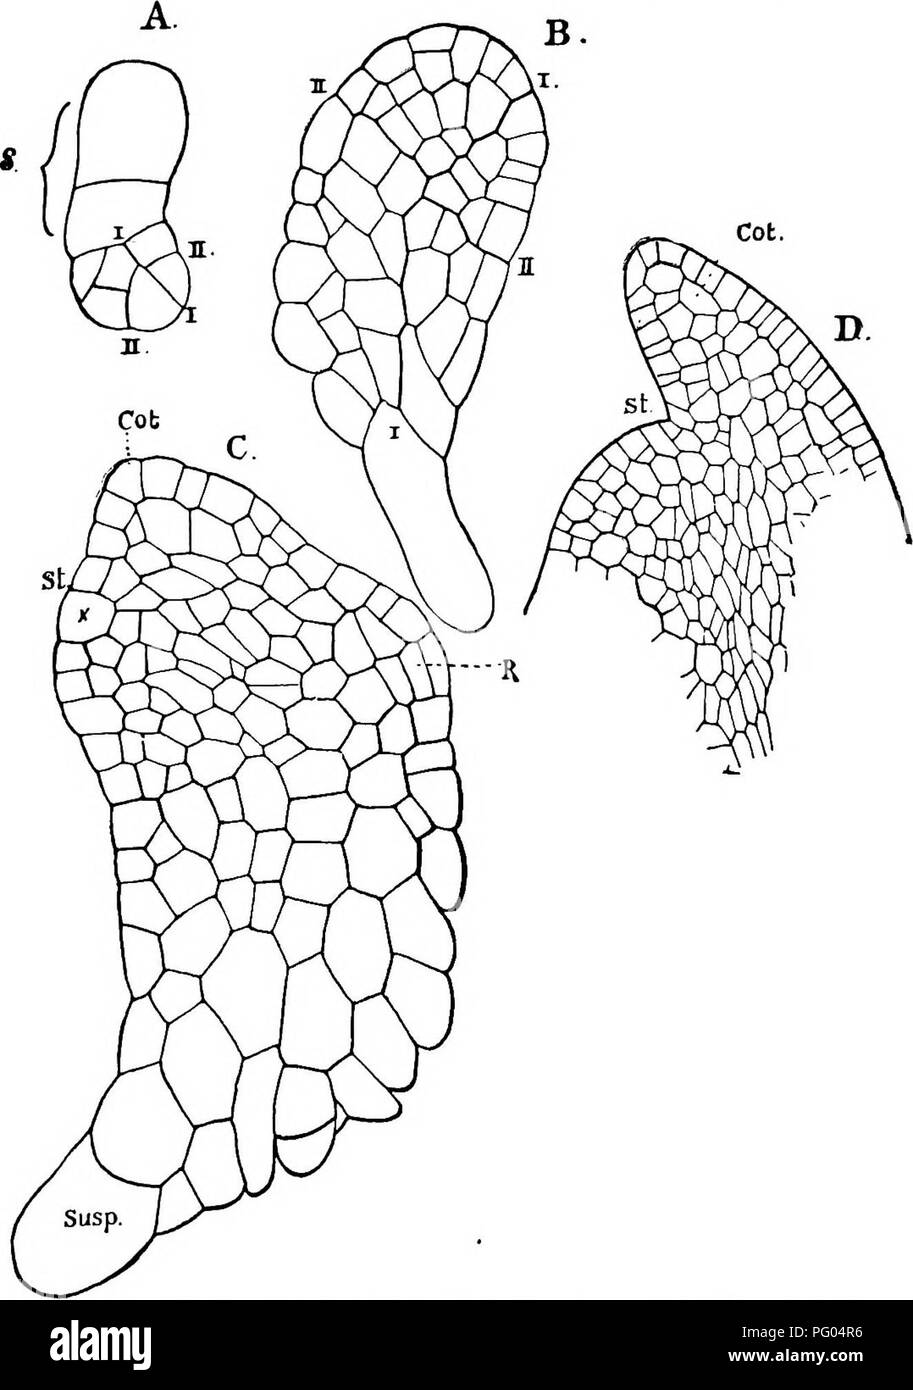 . The structure and development of mosses and ferns (Archegoniatae). Plant morphology; Mosses; Ferns. XIII LYCOPODINE^ 491 species, the two lower quadrants form the foot, which here remains completely buried within the prothallium. From the upper part of the embryo is next developed what Treub calls the &quot;protocorm.&quot; This is a tuber-hke organ (Fig. 283, D,. Fig. 285.-—Embryogeny of Lycopodium phlegmaria (after Treub). st, Stem; cot, cotyledon; susp, suspensor. A, X31S; B, X235; C, X235; D, X175. pc), from which the leaves and stem apex are subsequently developed. The cotyledon arises  Stock Photo